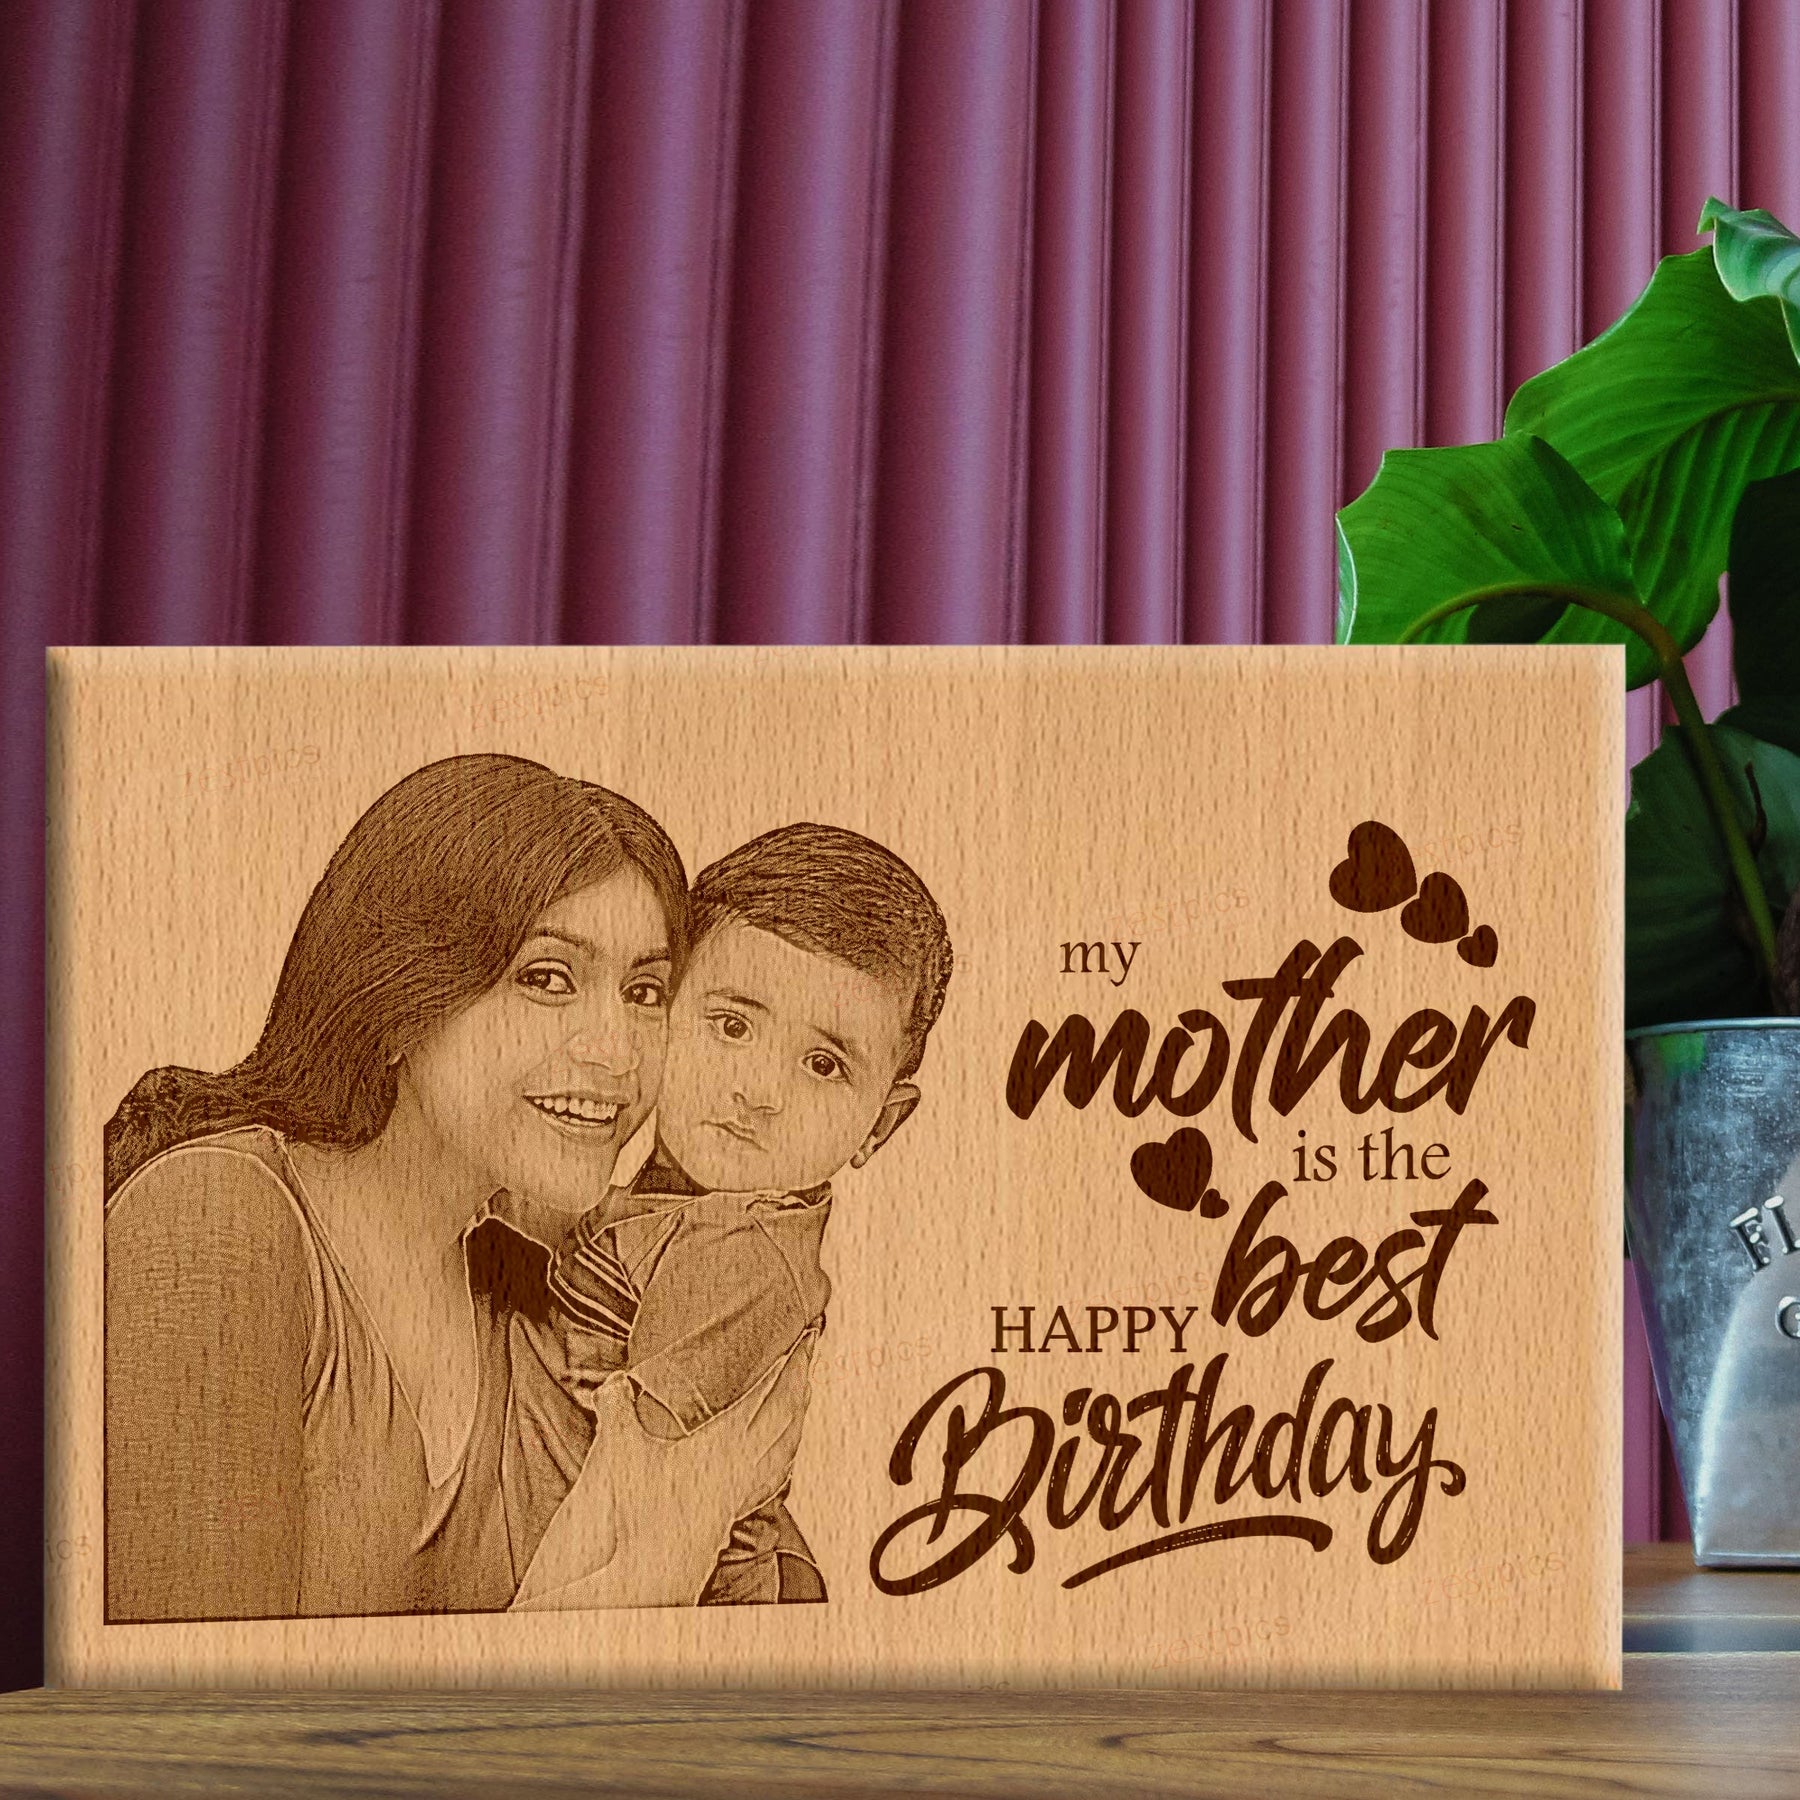 5 Incredible Diwali Gifts for Mother to Melt Her Heart